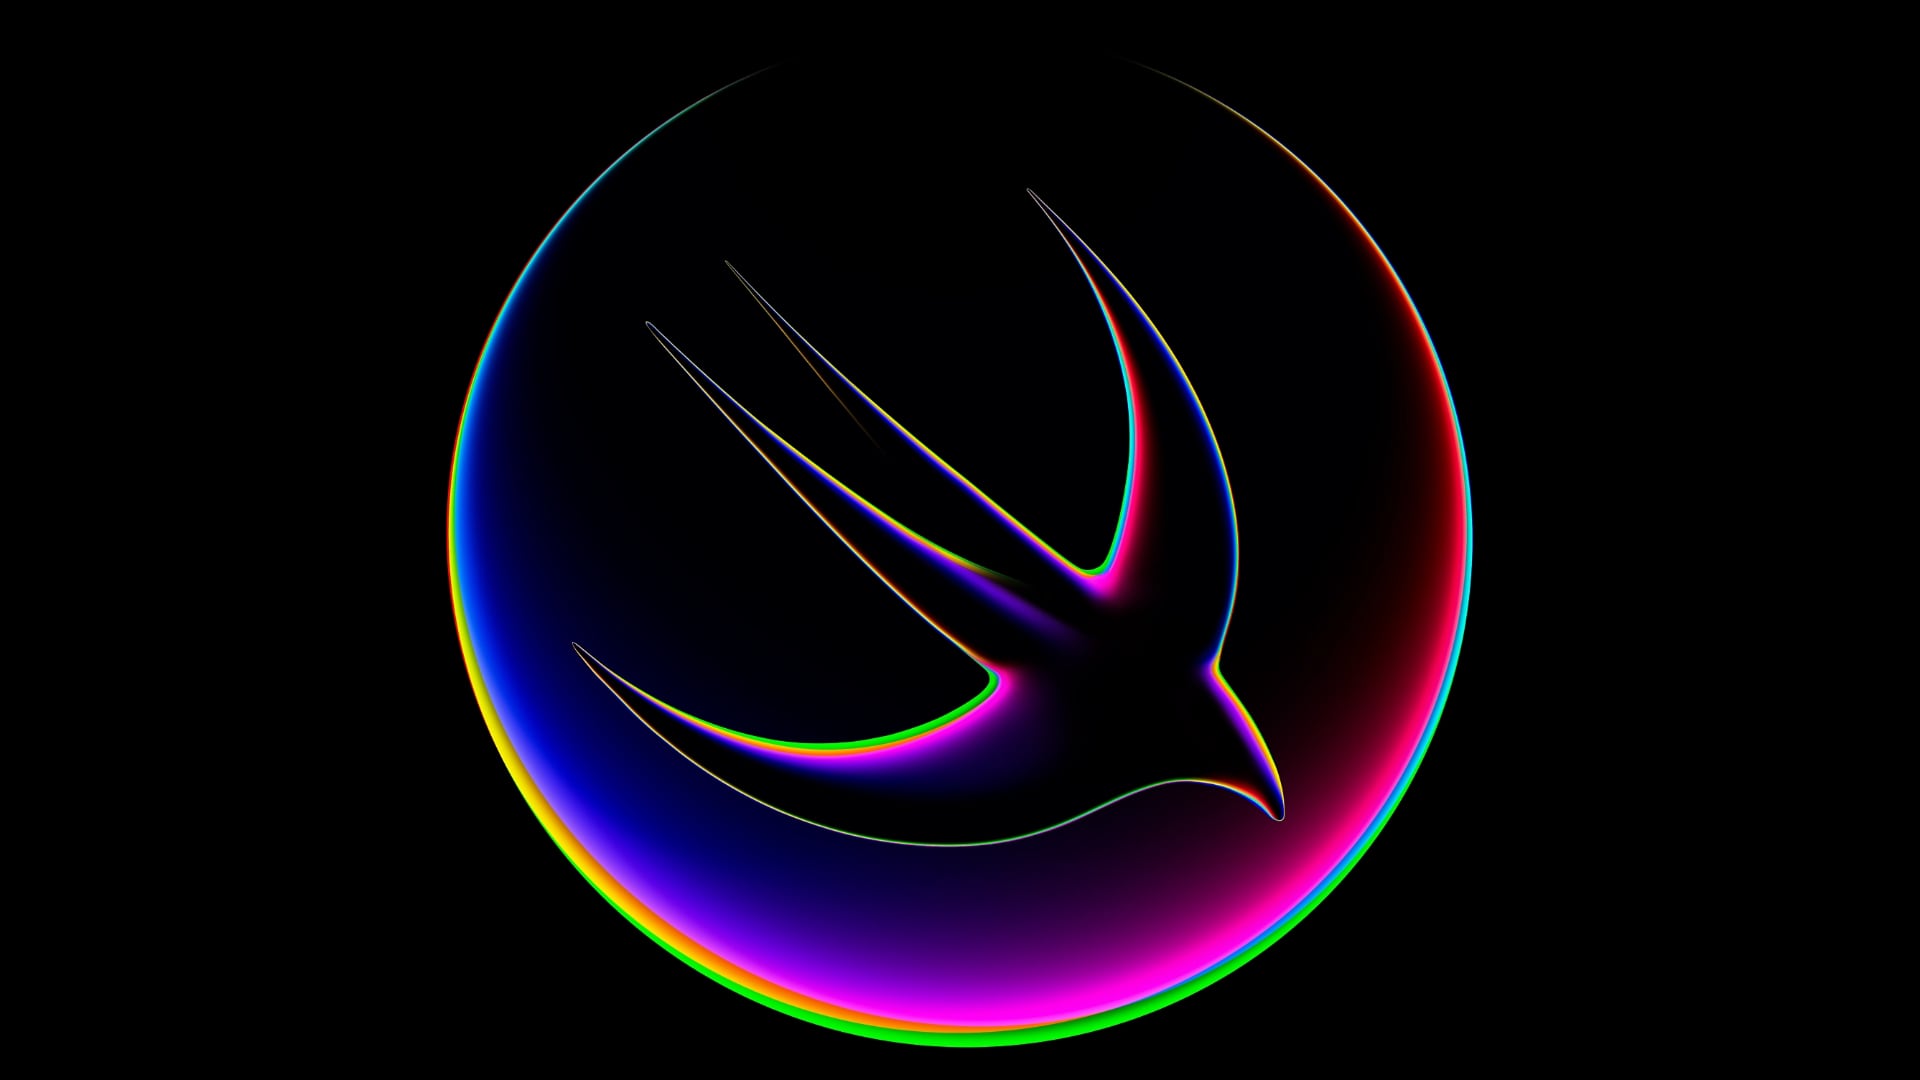 The Apple Swift Student Challenge logo for WWDC 2023